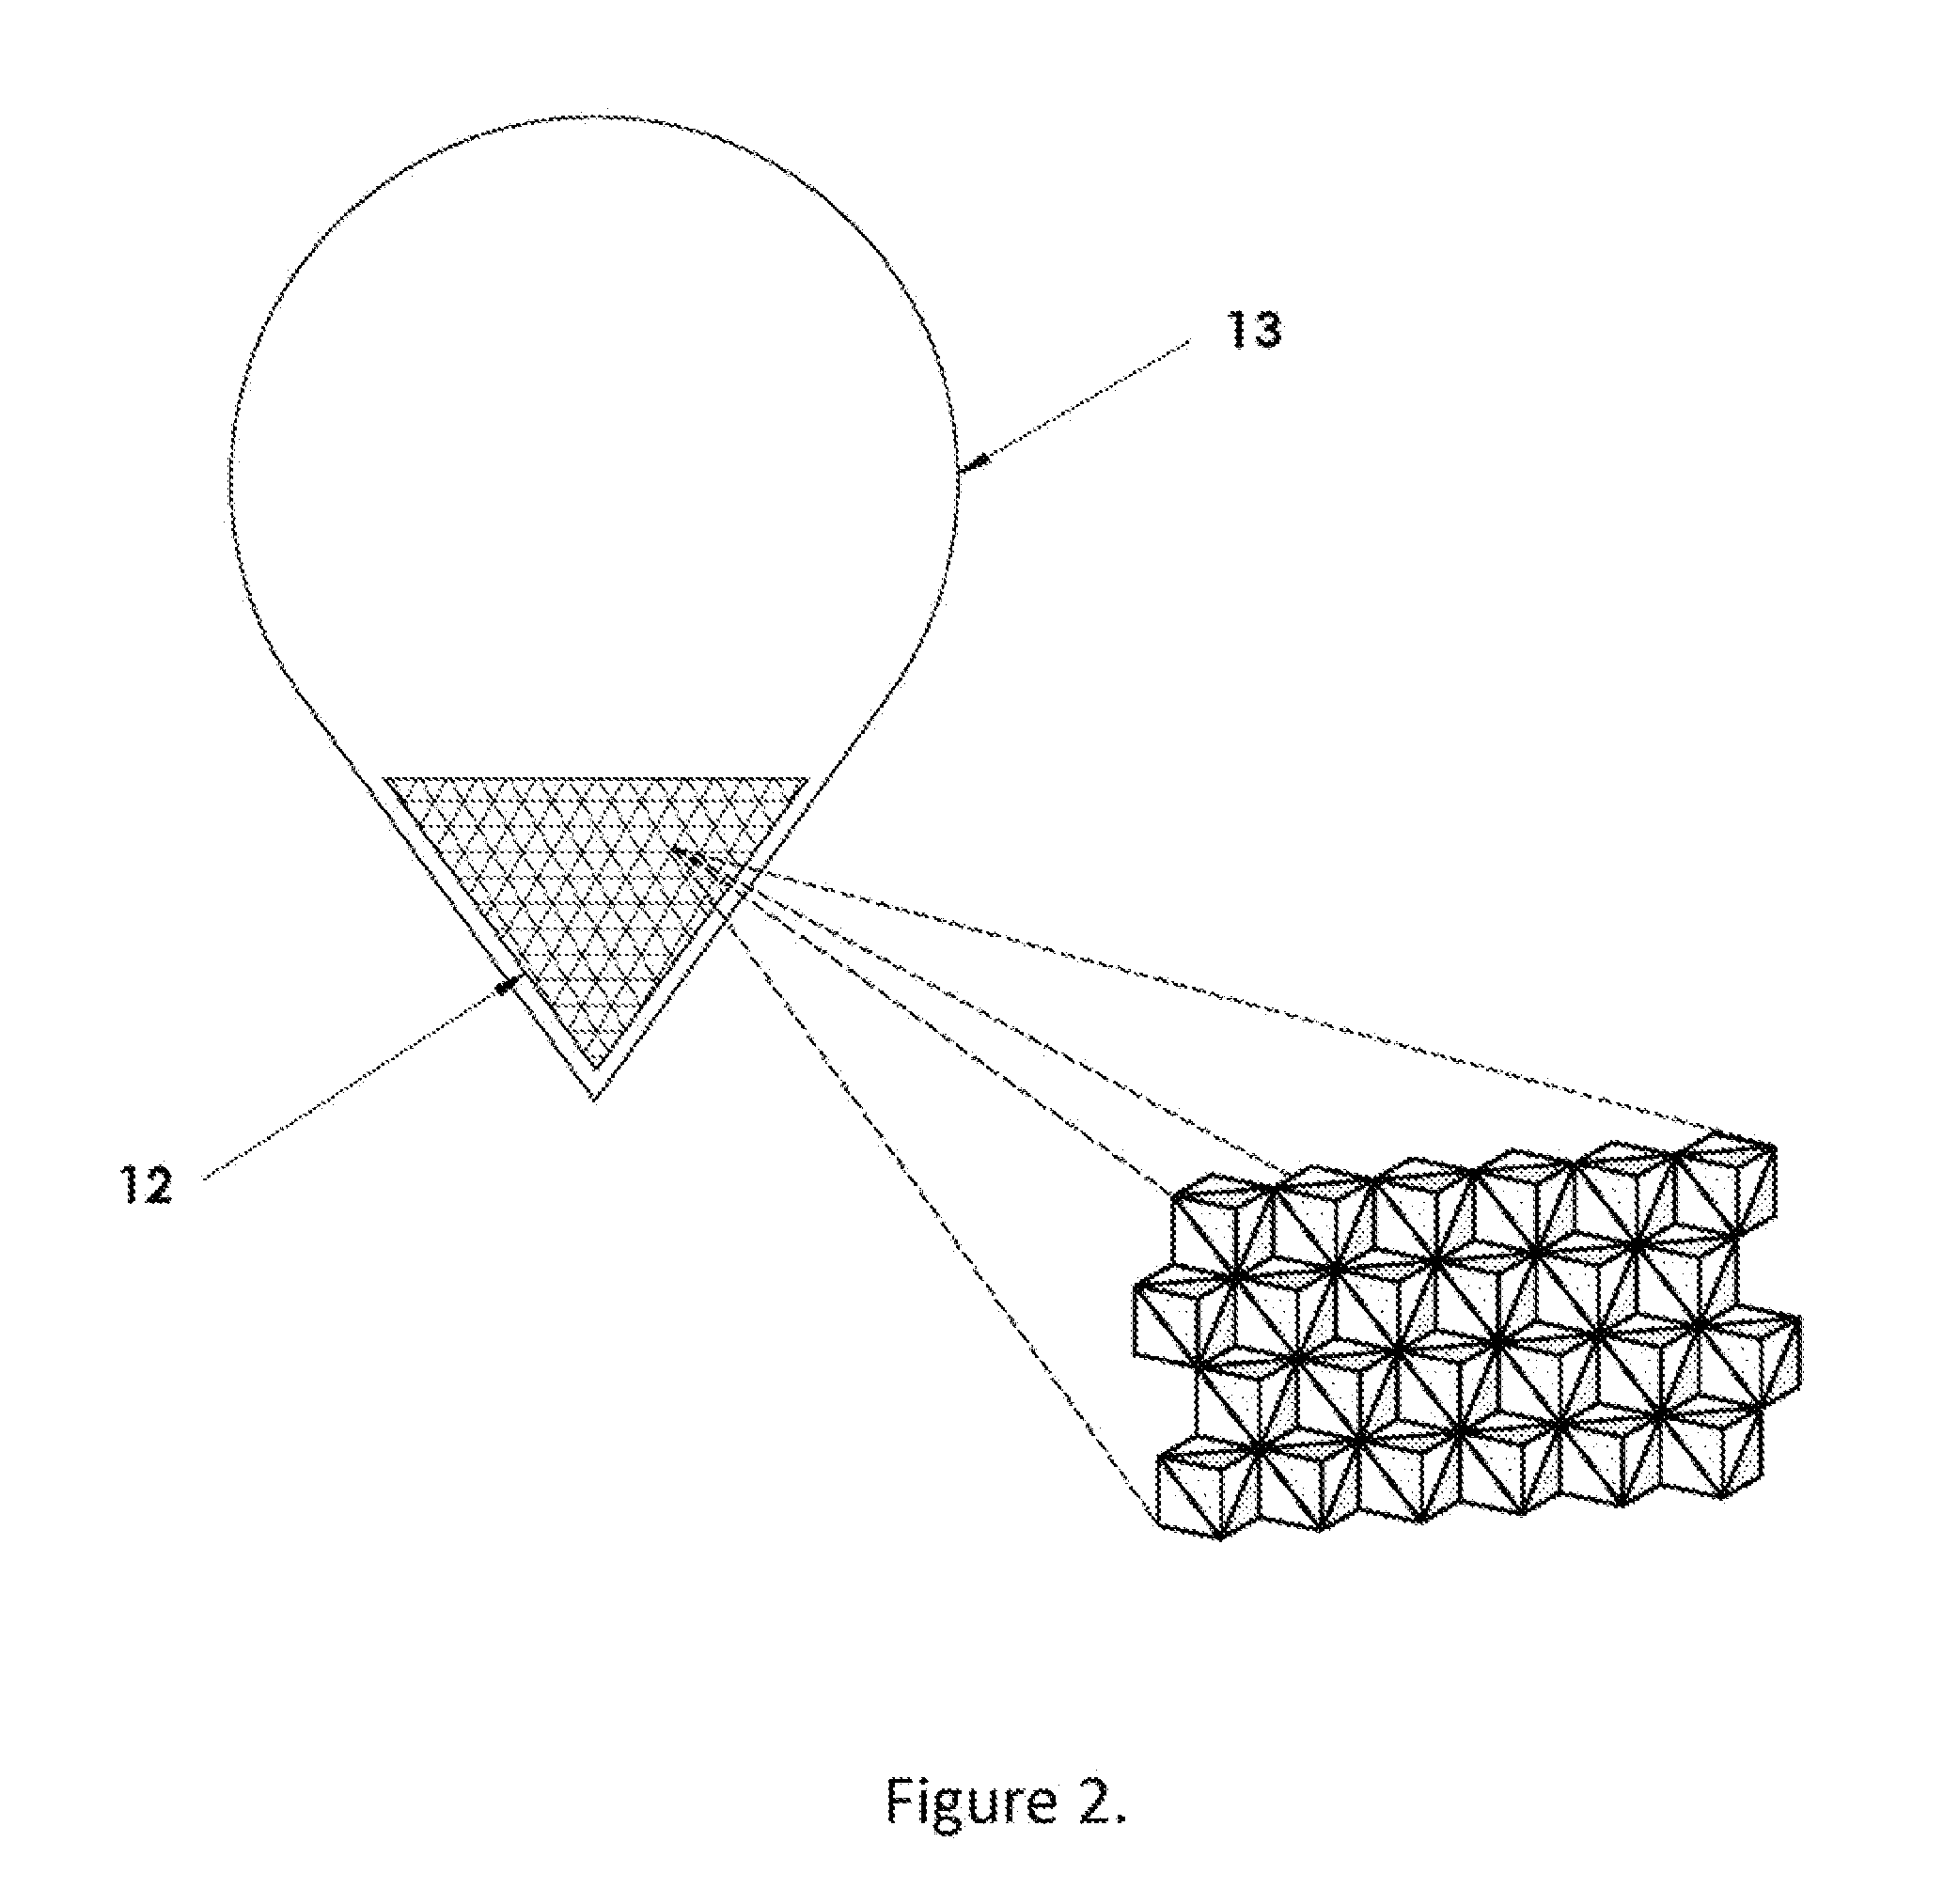 Apparatus and Method for Small Scale Wind Mapping